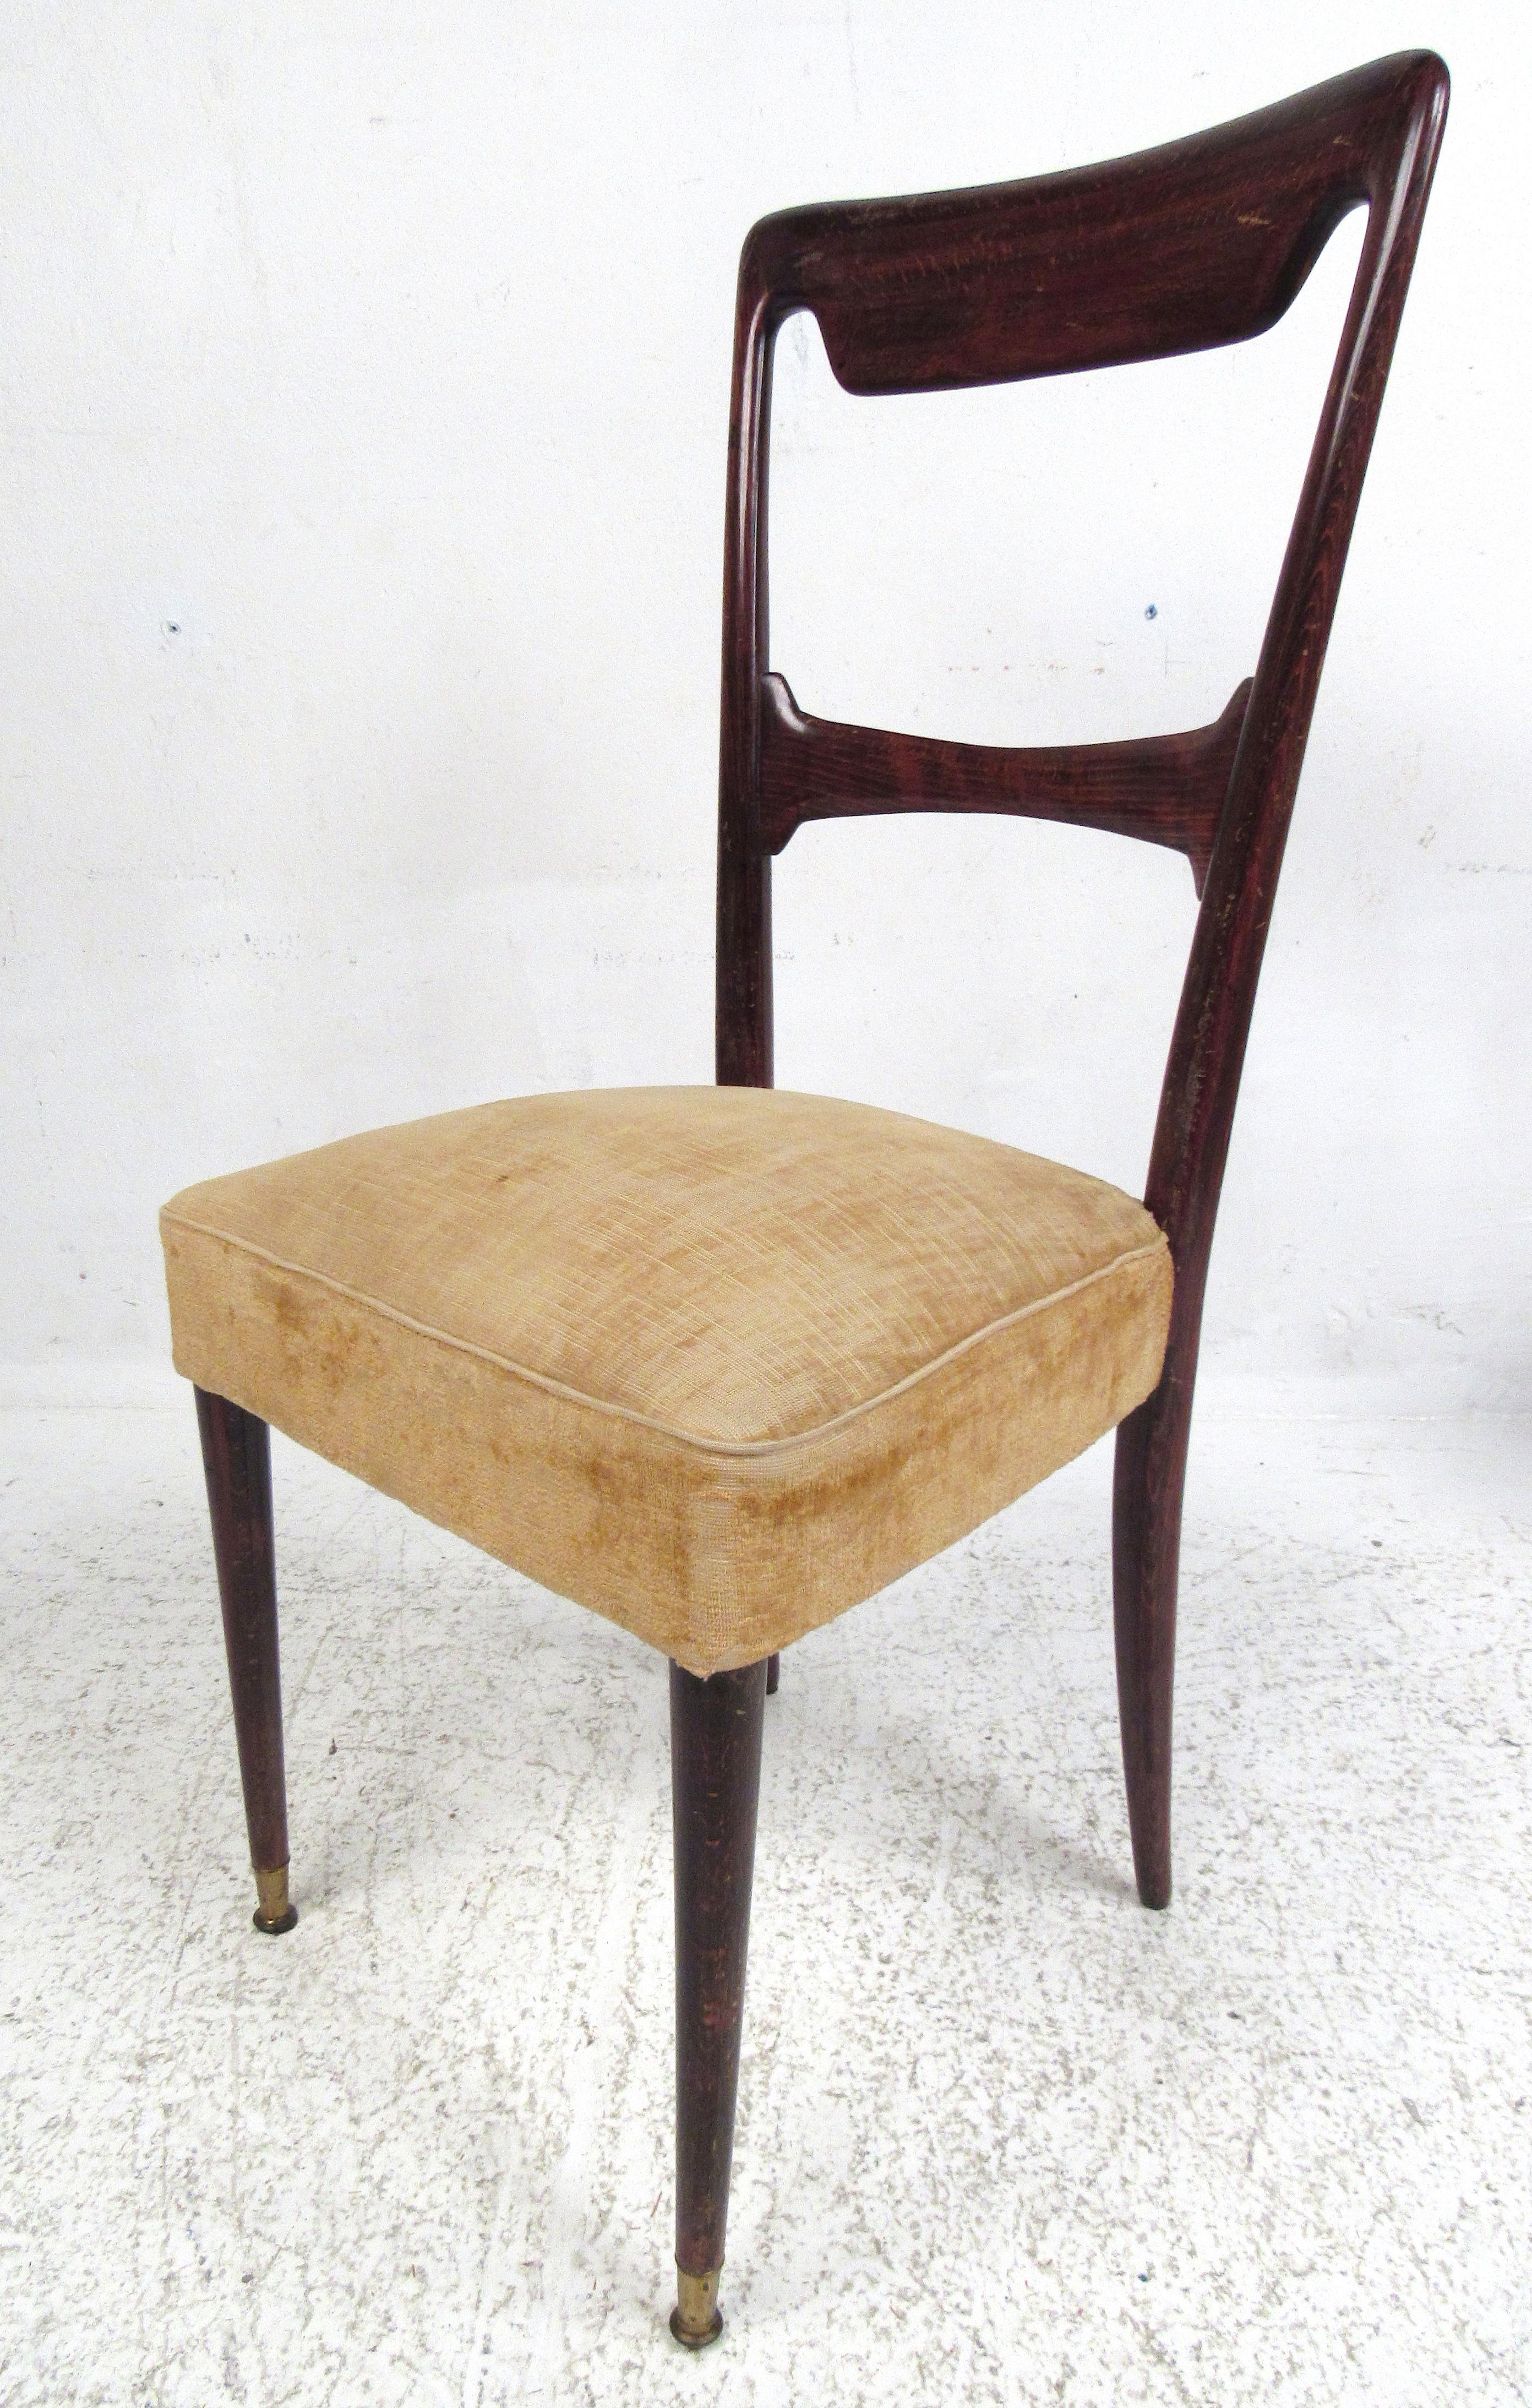 Exceptionally rare dining chairs from legendary Italian designer Guglielmo Ulrich. These beautifully sculpted mahogany chairs exemplify the sleek lines and subtle elegance of early Mediterranean mid-century modern design.  Crushed velvet seating and